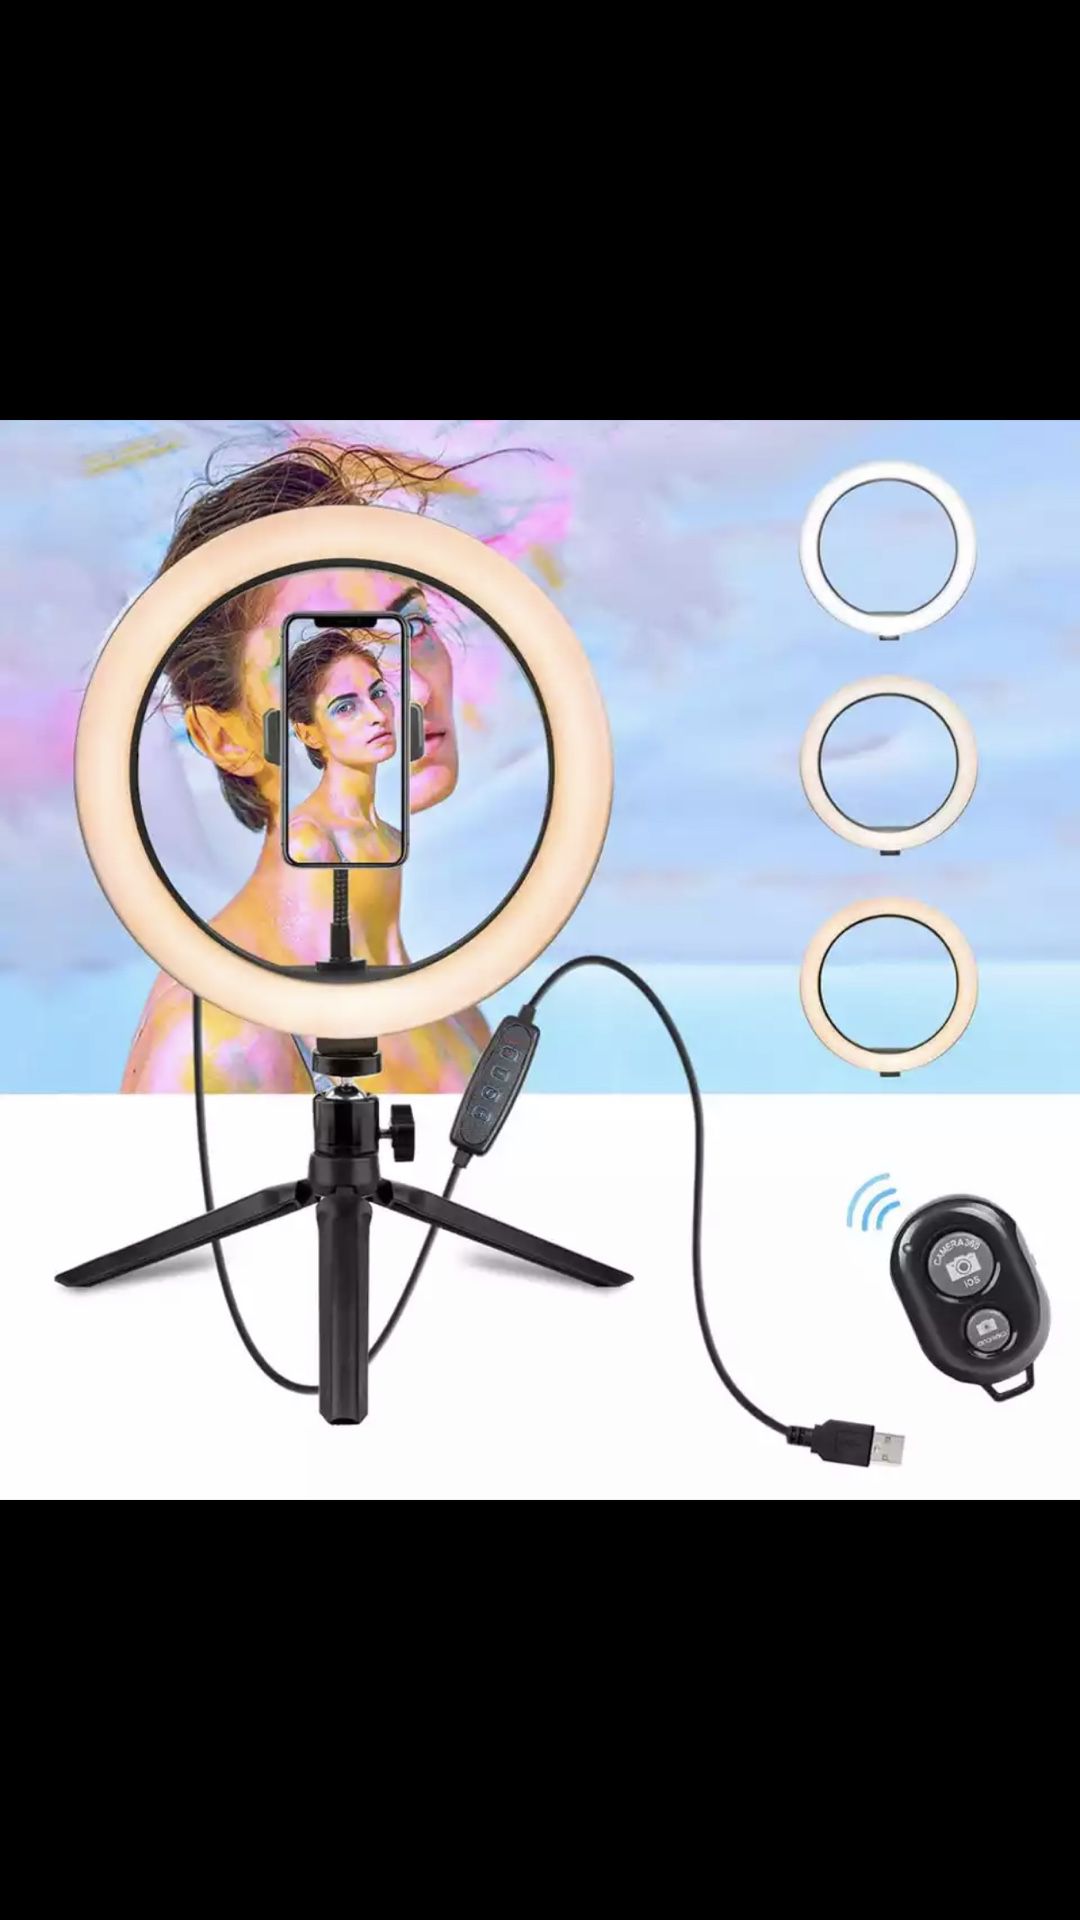 10.2 Inch Ring Light with Stand - LED Camera Selfie Light Ring for iPhone Tripod and Phone Holder for Video Photography